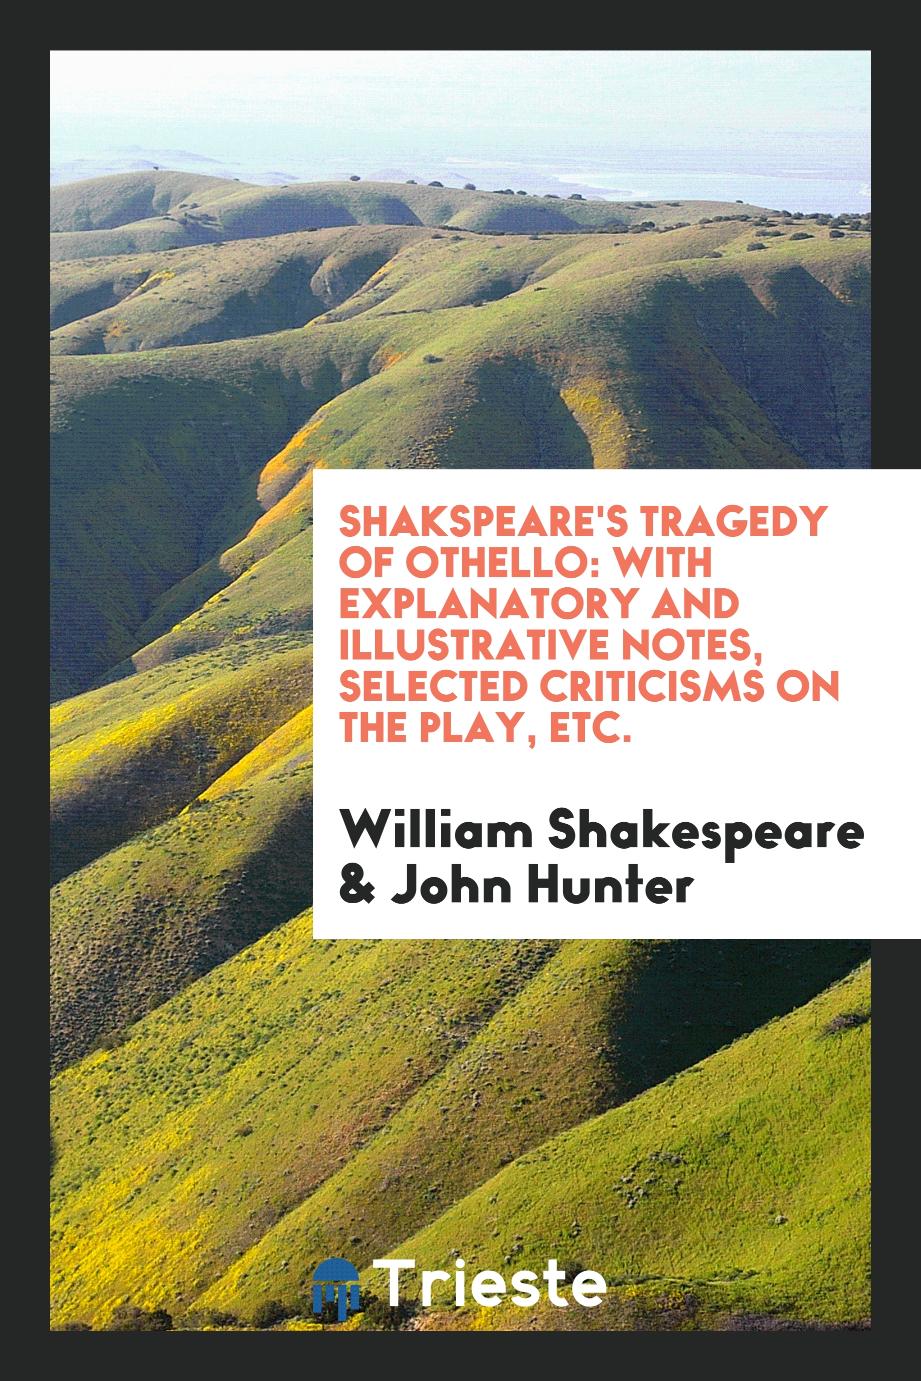 Shakspeare's Tragedy of Othello: With Explanatory and Illustrative Notes, Selected Criticisms on the Play, Etc.